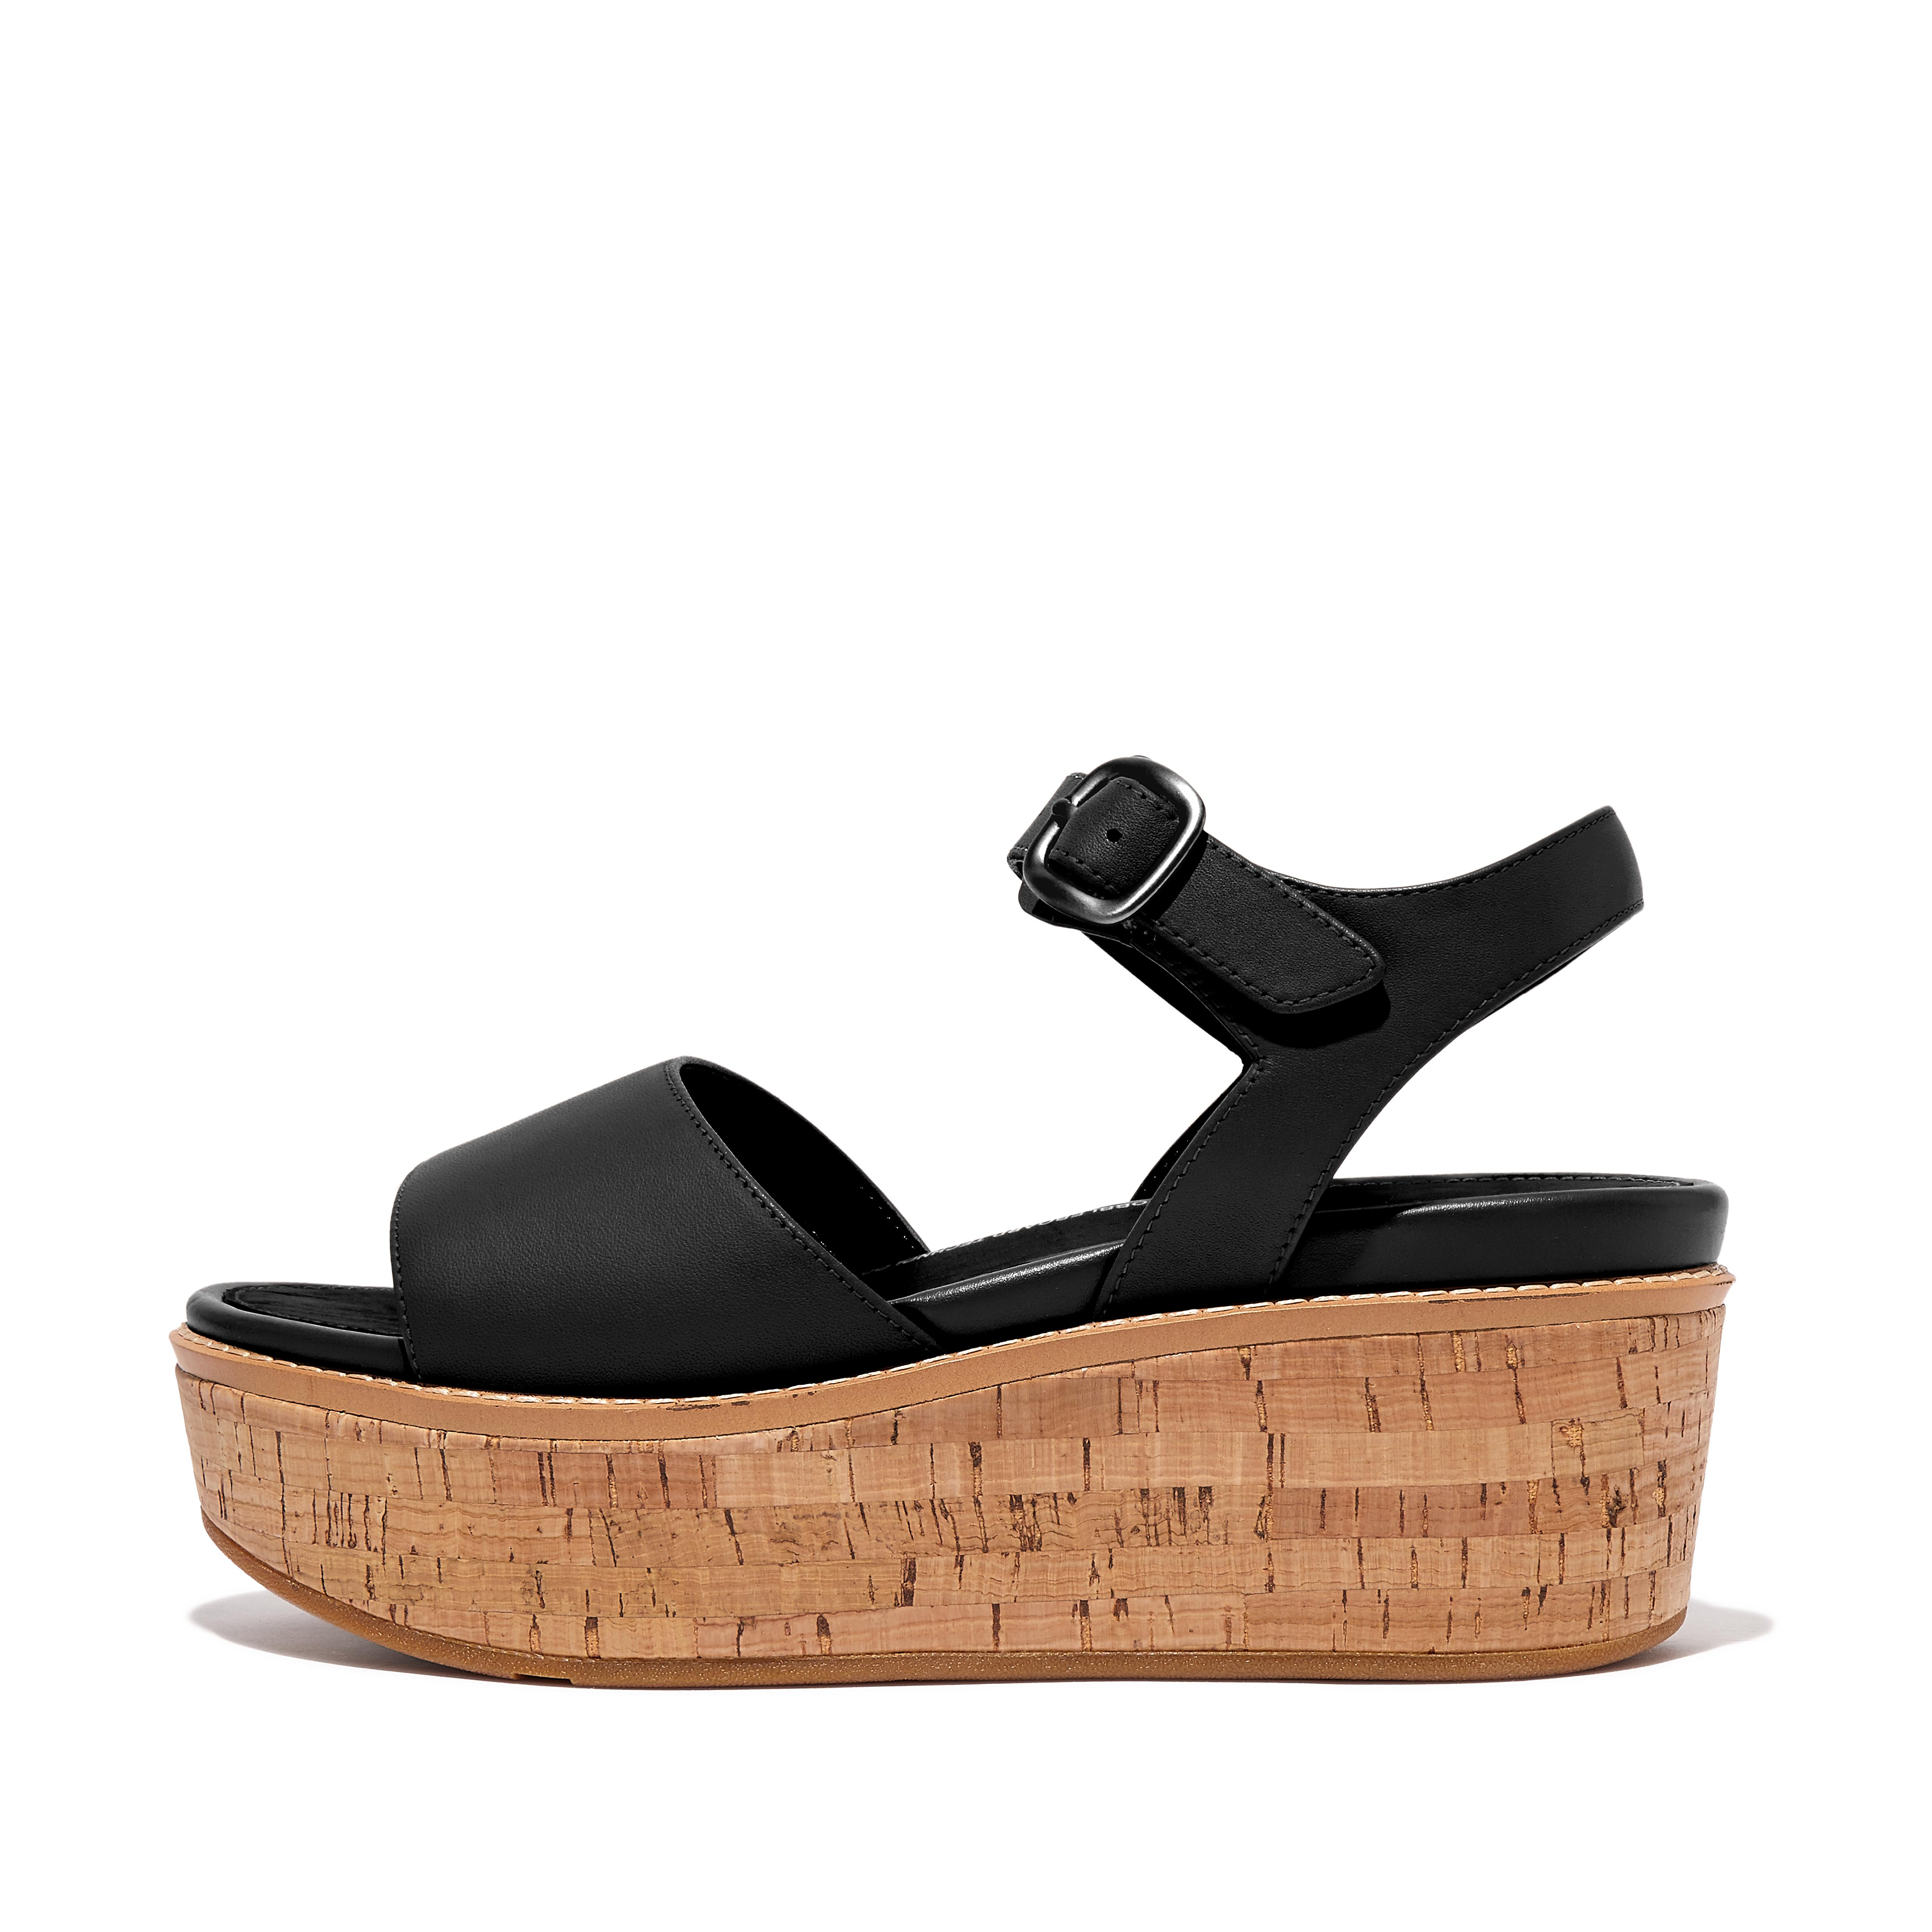 Fitflop Cork-Wrap Leather Wedge Sandals